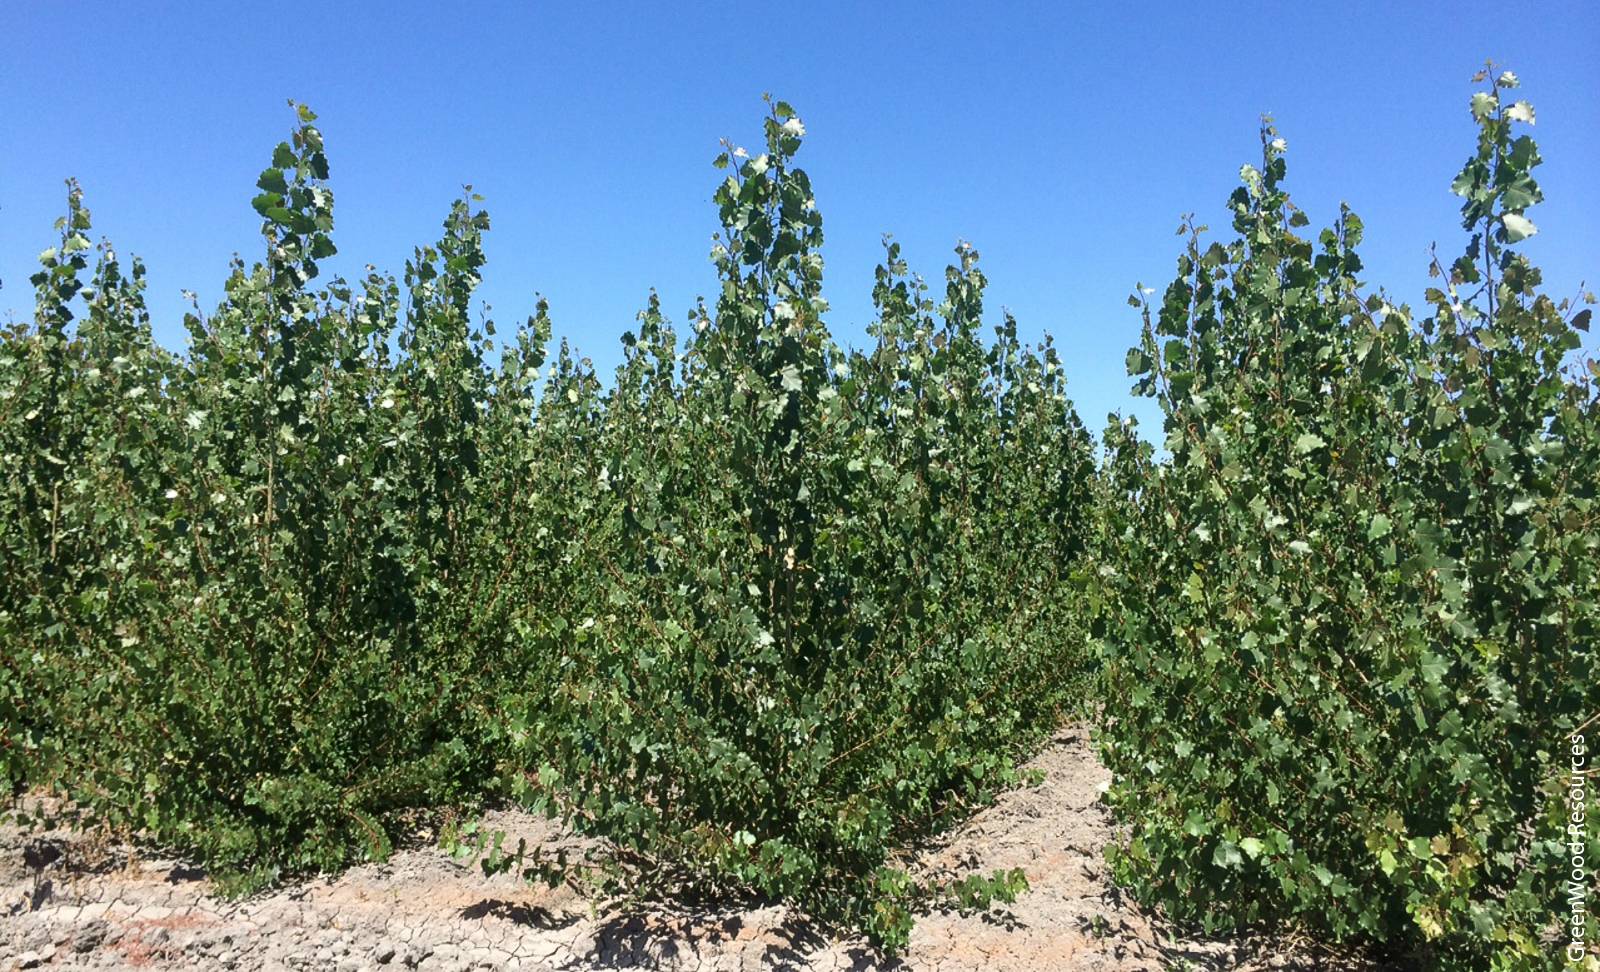 Partially irrigated hybrid poplar plantation at a demonstration field site in Clarksburg, California, about 1 1/2 years after planting.